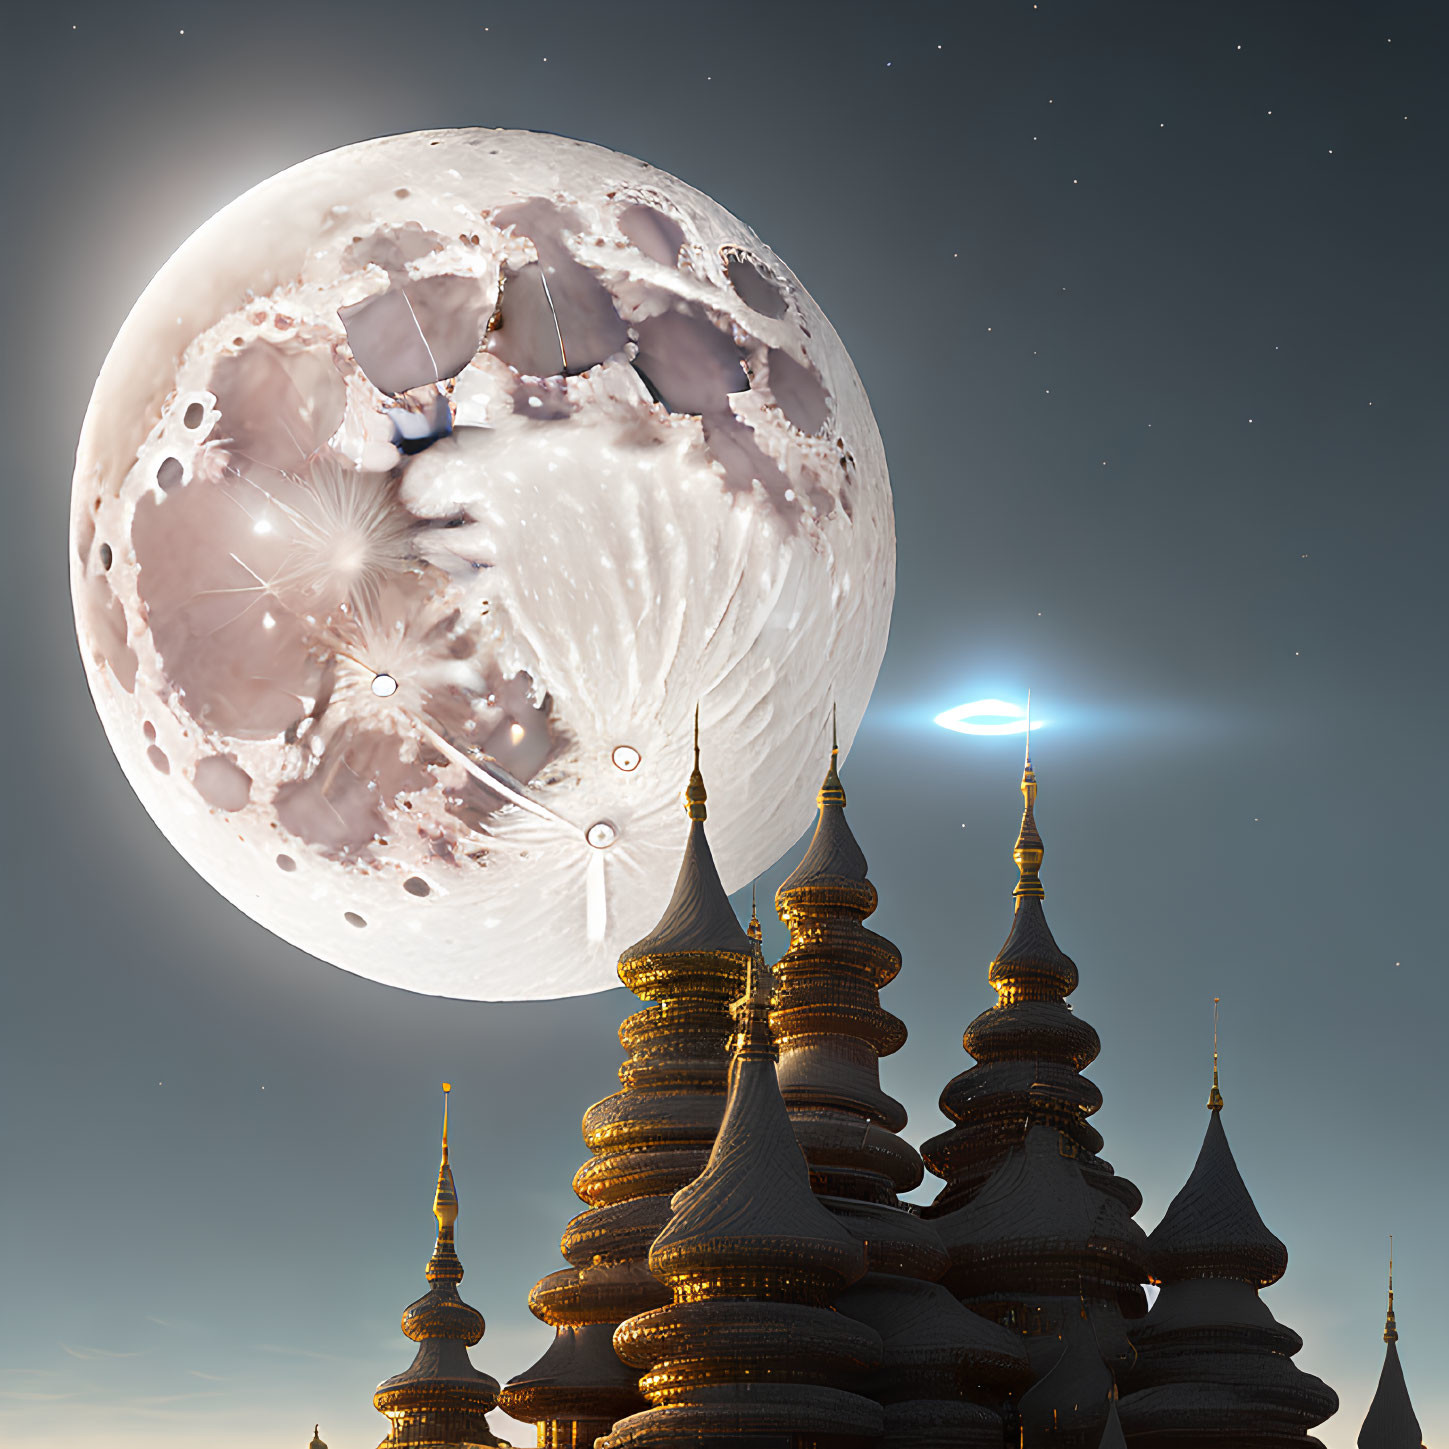 Detailed fantasy castle under large moon and glowing comet in twilight sky